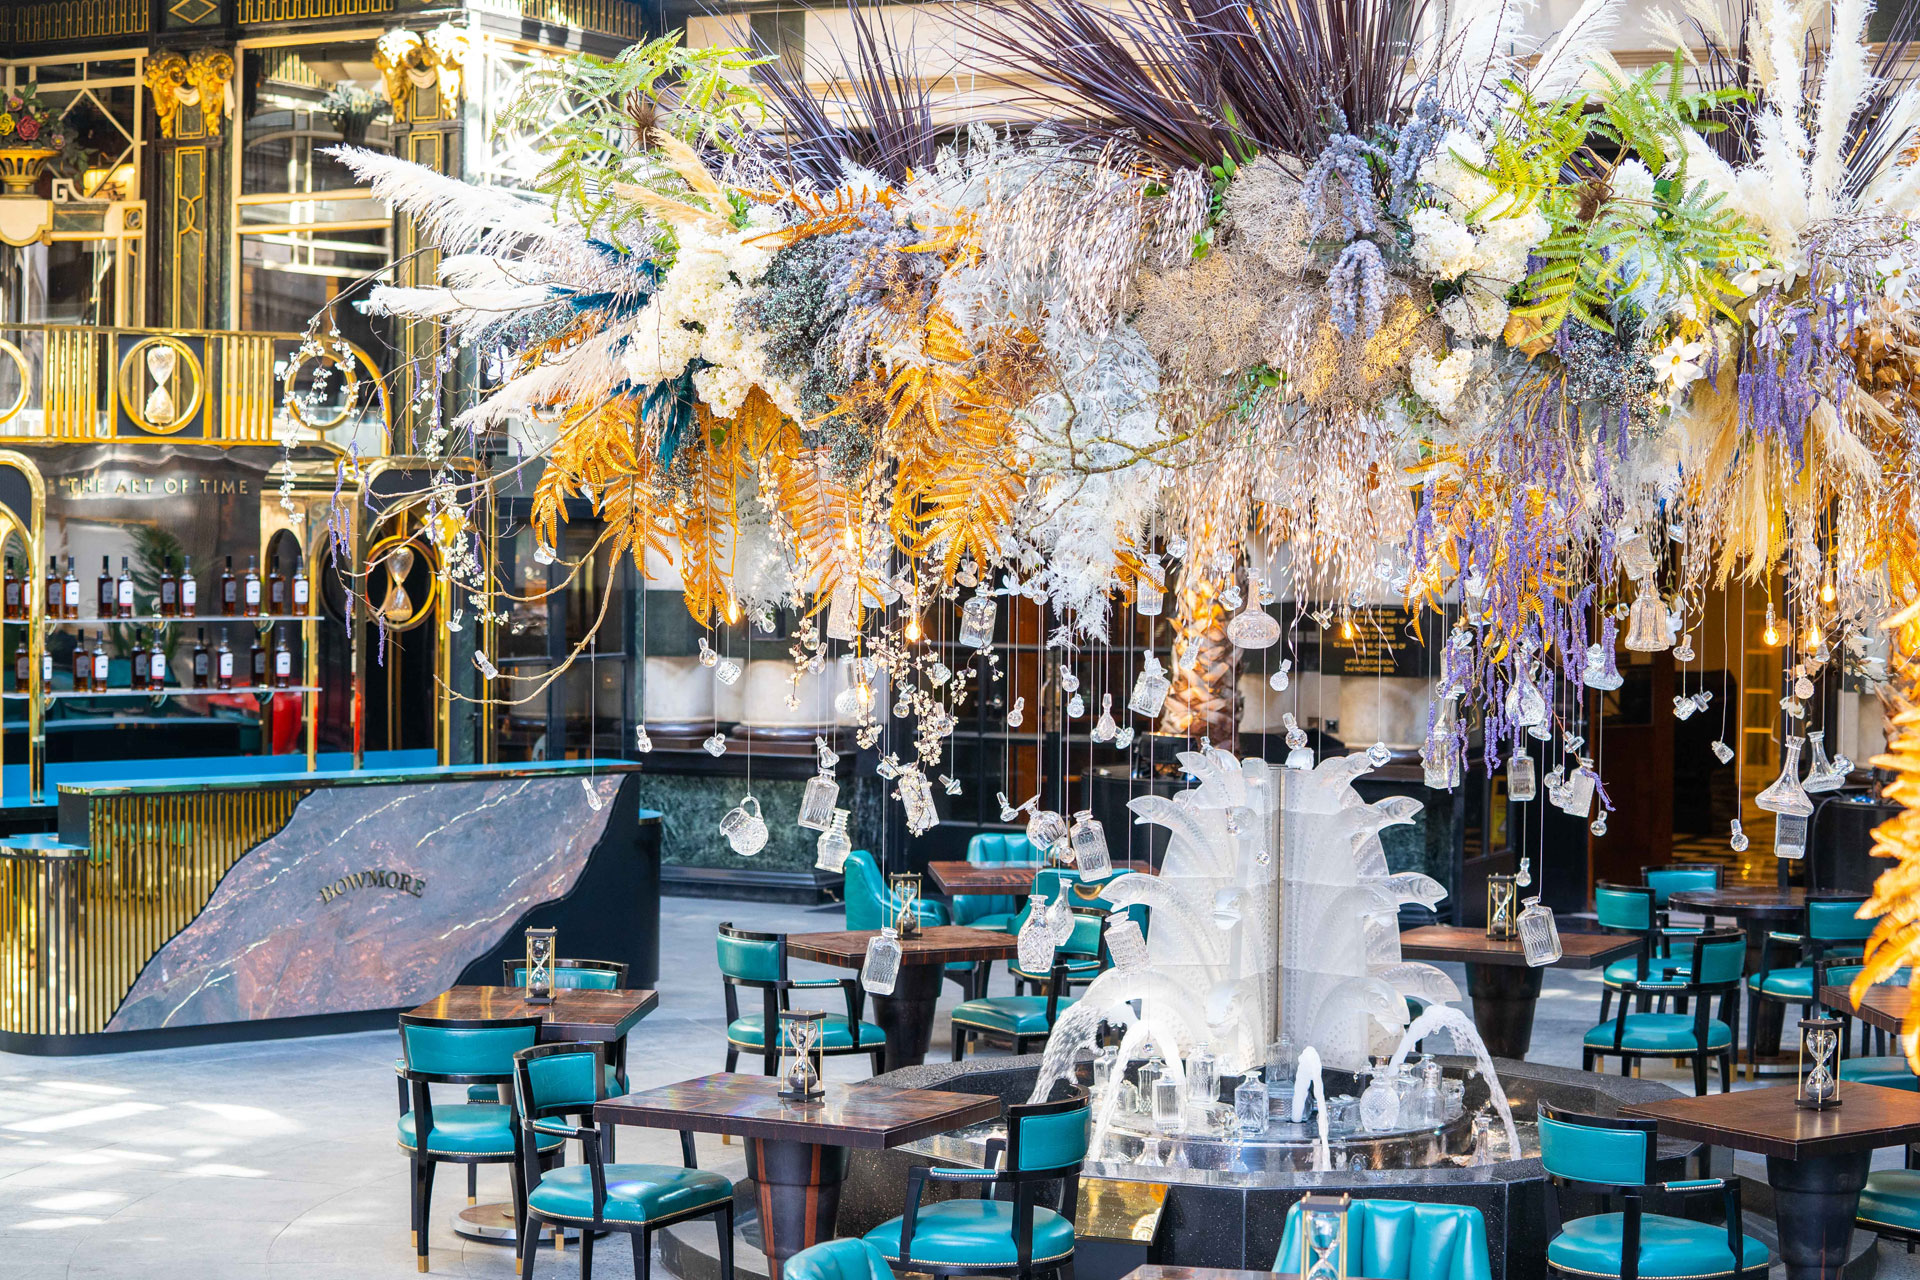 Solas outdoor dining at The Savoy pop up